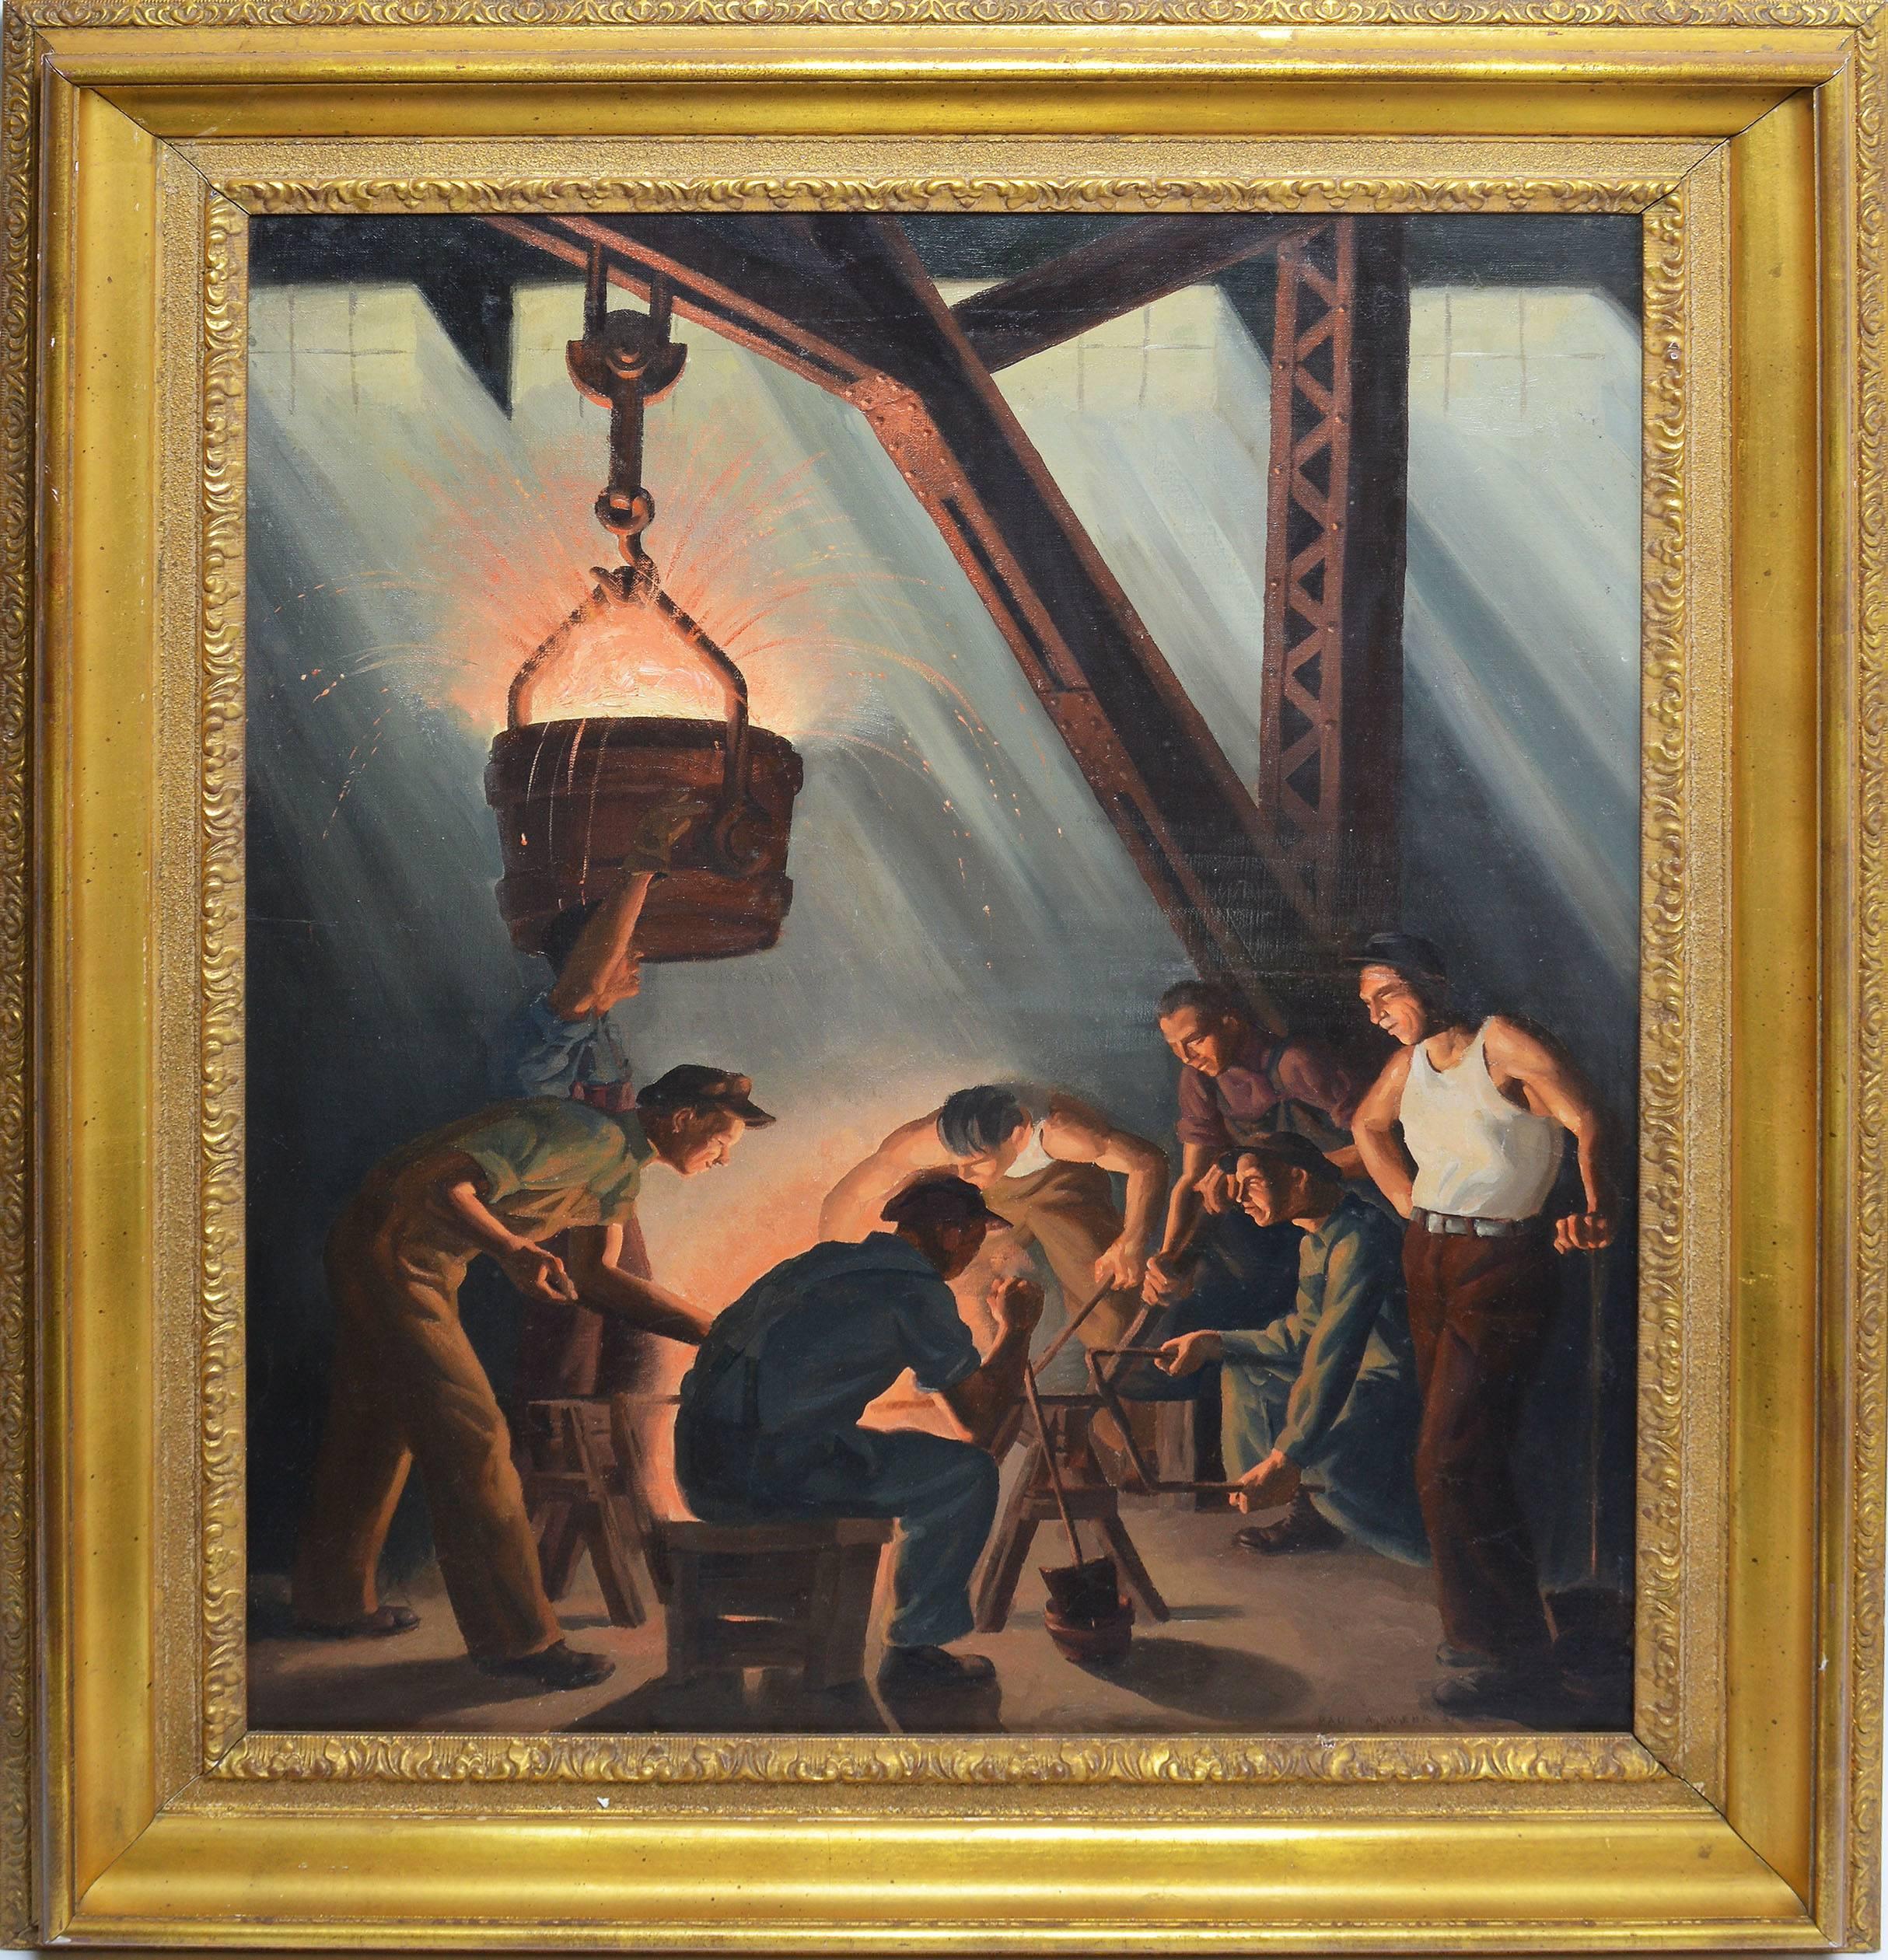 Modernist industrial view by Paul Wehr (1914-1973).  Oil on canvas, circa 1937.  Signed lower right, "Paul A. Wehr".  Displayed in a giltwood frame.  Image size, 24"L x 30"H, overall 31"L x 37"H.